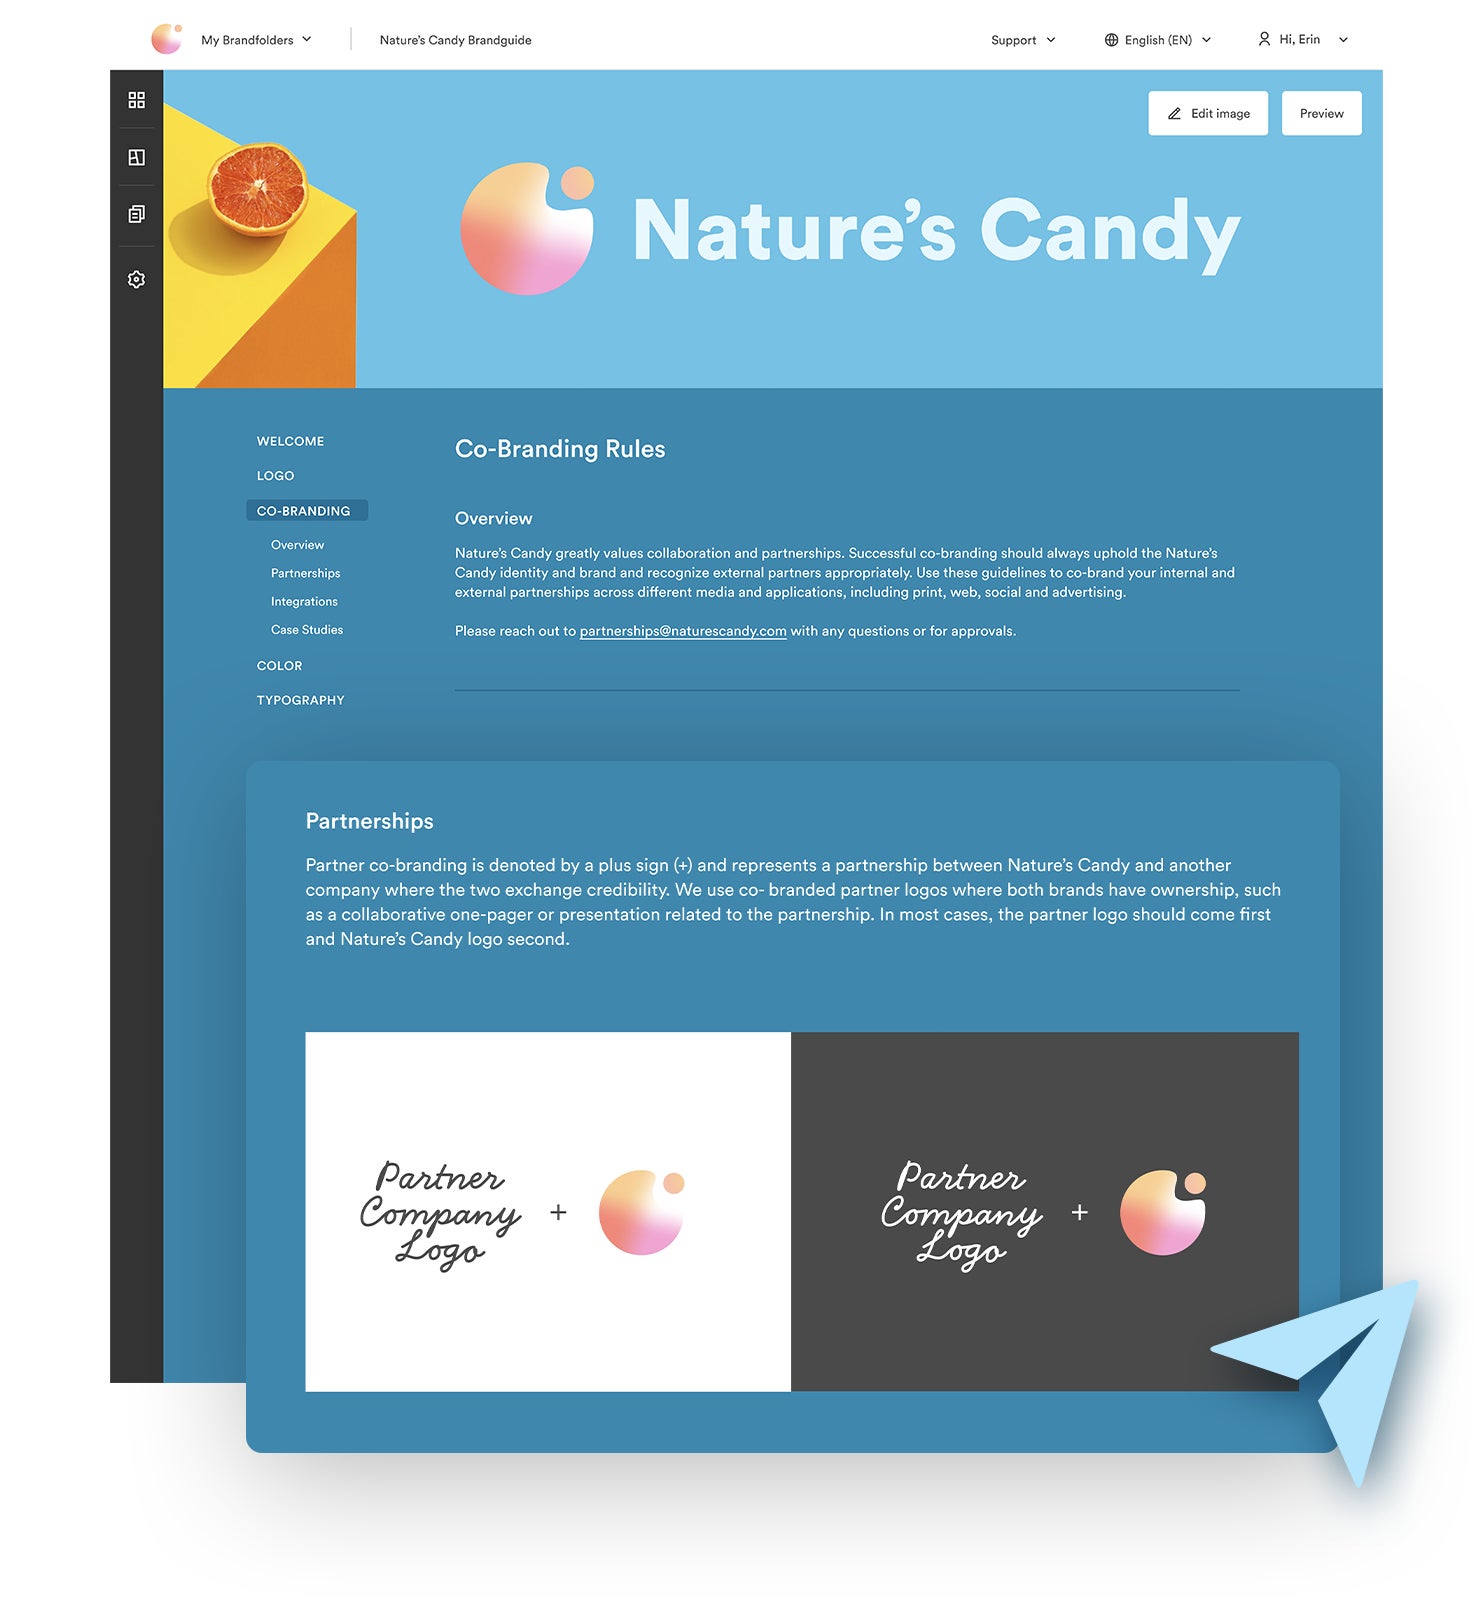 A mock Nature's Candy Brandguide with a Partnerships section